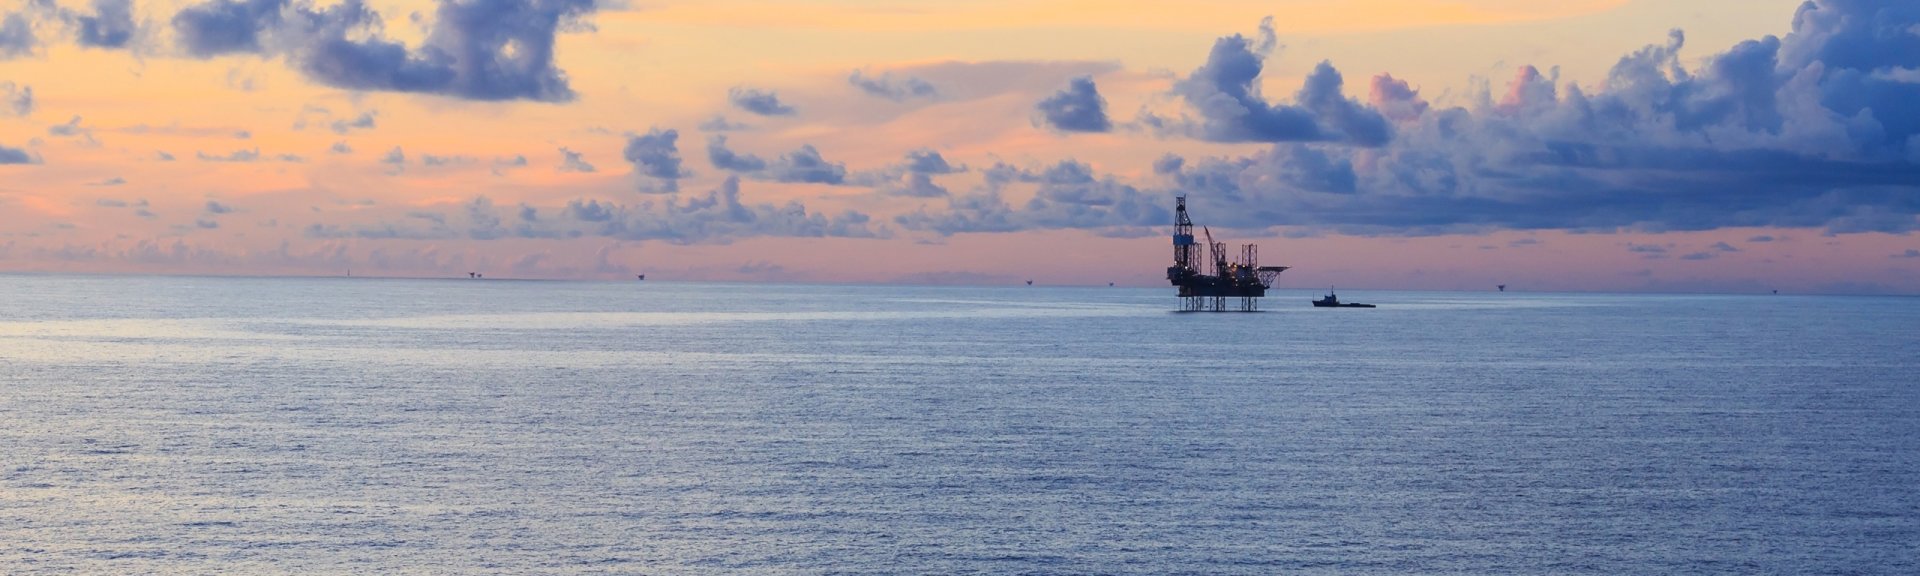 A ship and oil rig. Image: Shutterstock.